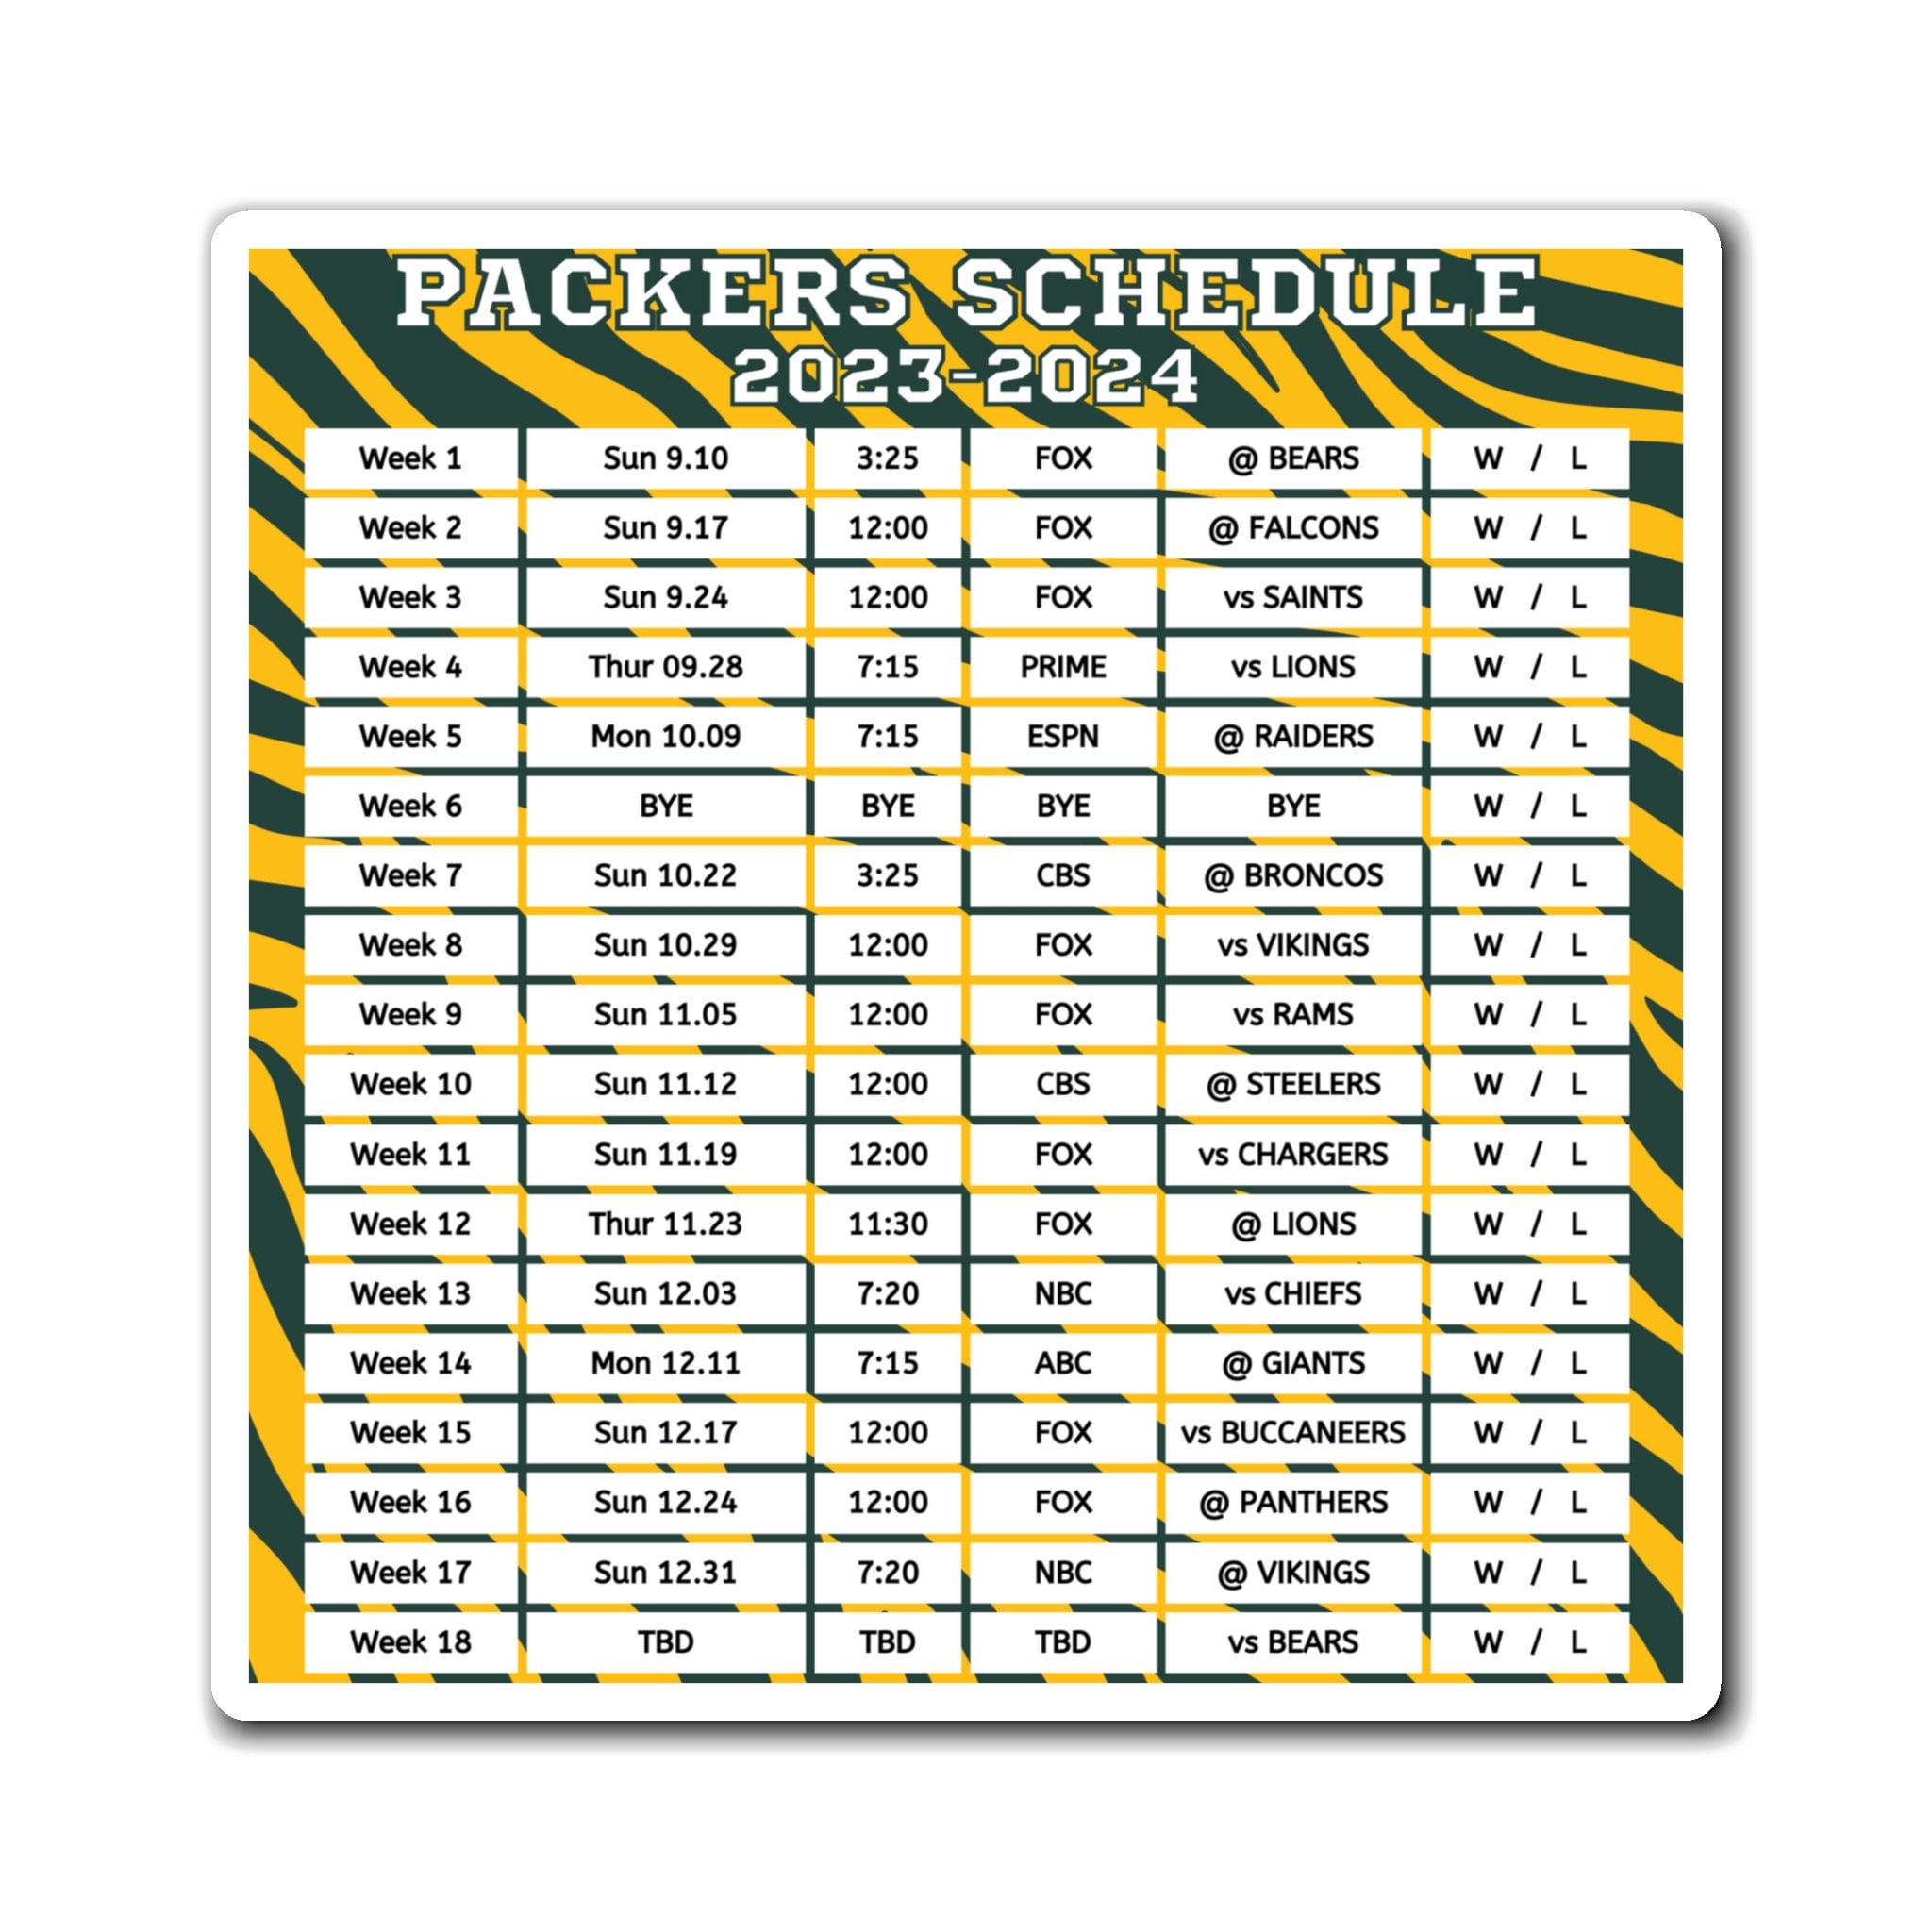 2023 2024 Green Bay Packers Schedule 6 x 6 Inches NFL Etsy.de